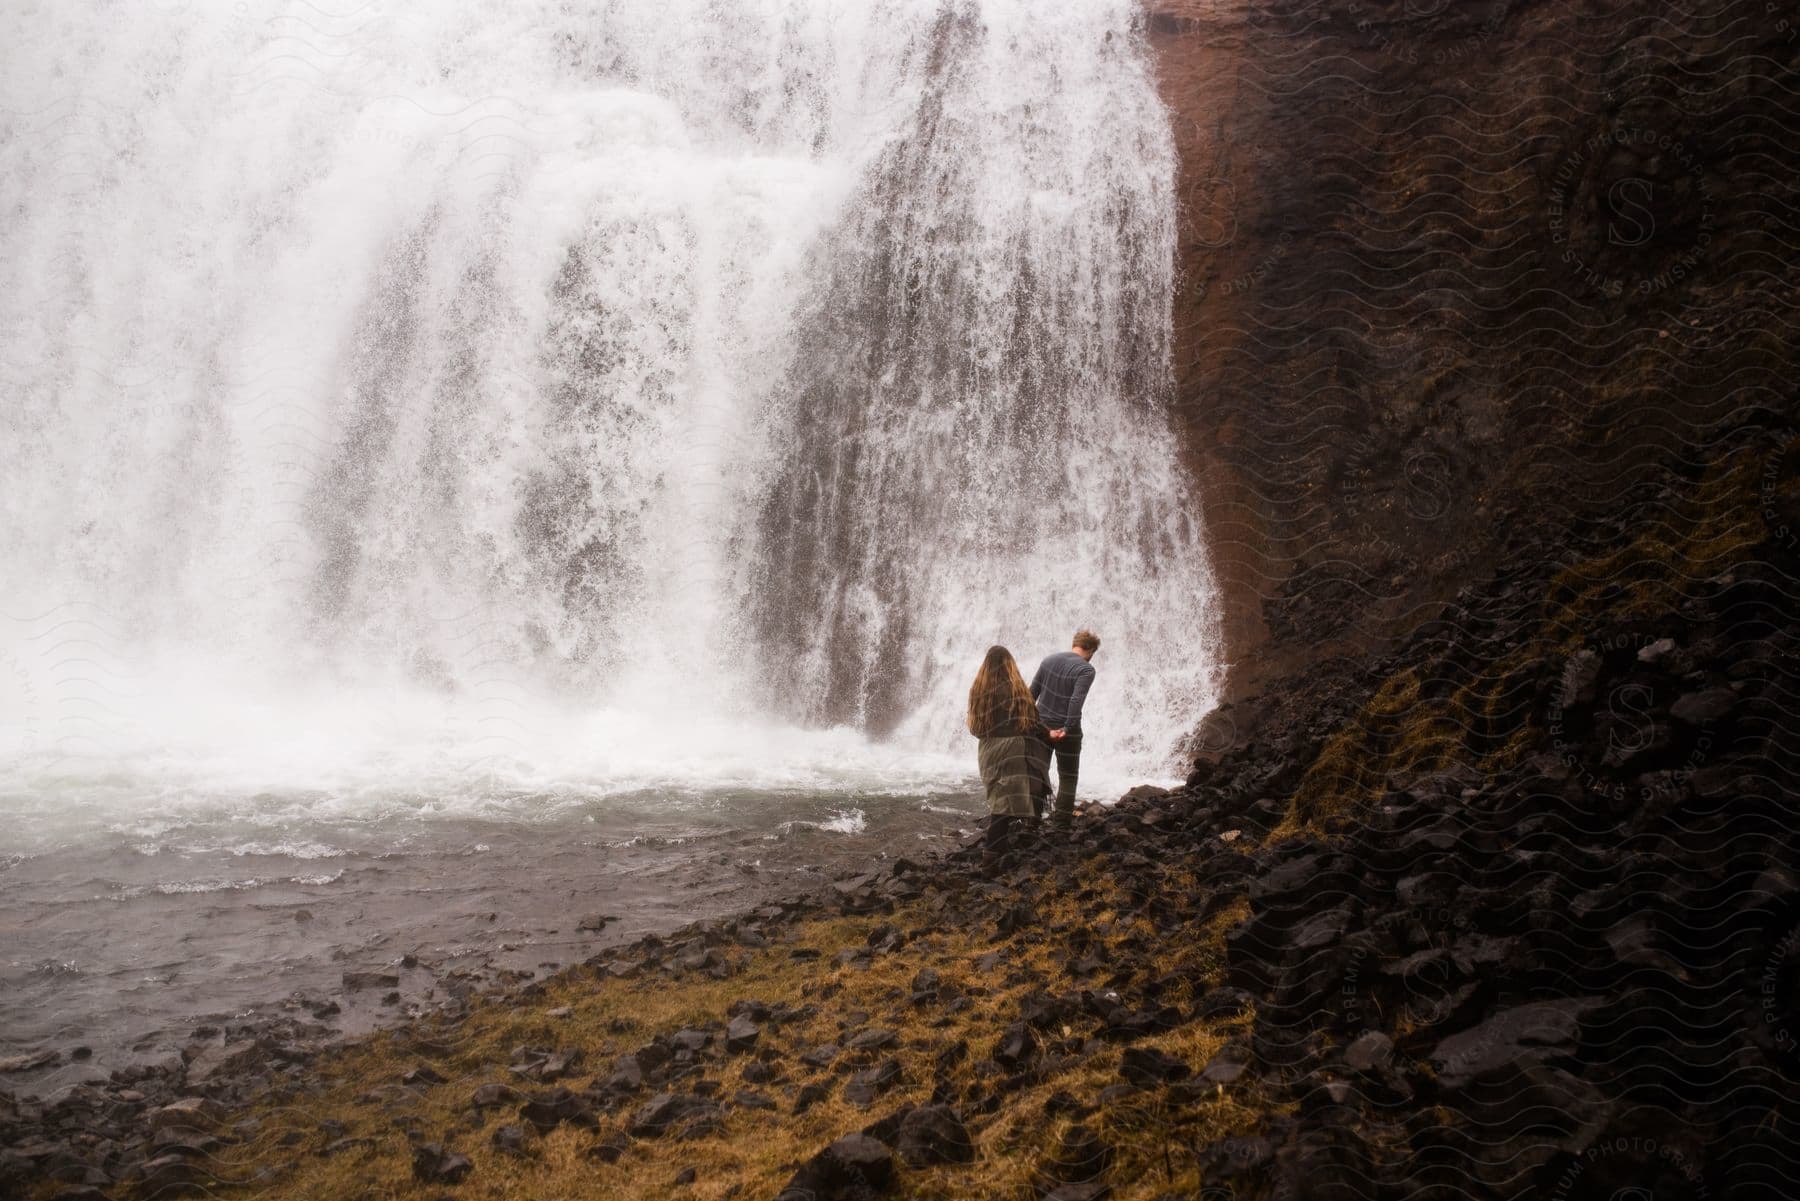 A couple watching a large waterfall. The waterfall is powerful, with white, foamy water falling from a considerable height.